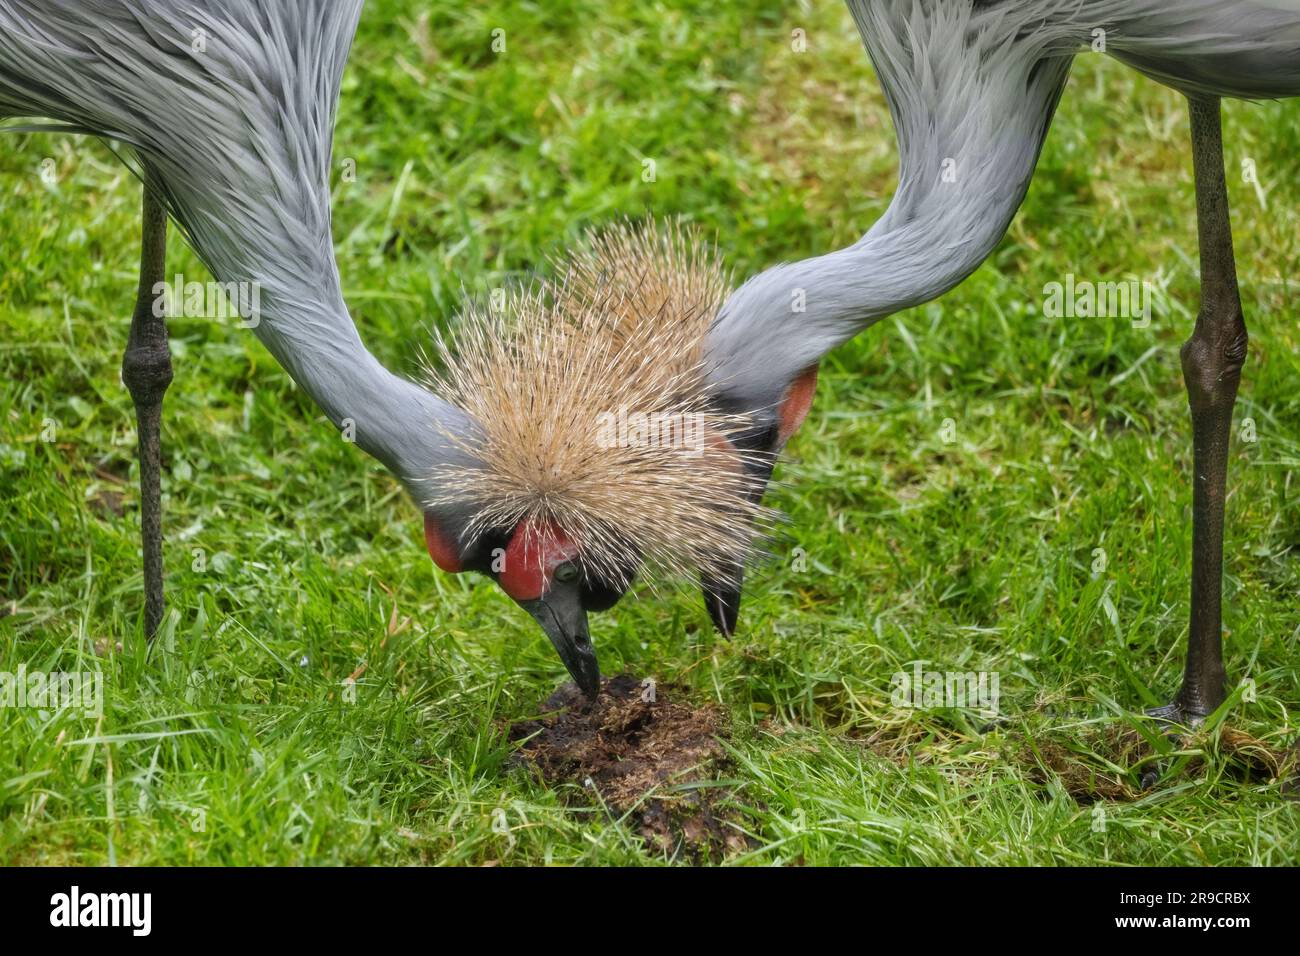 Couple of Grey crowned cranes (Balearica regulorum gibbericeps) digging in the grass, other names: crested crane, bird in the family Gruidae. Stock Photo